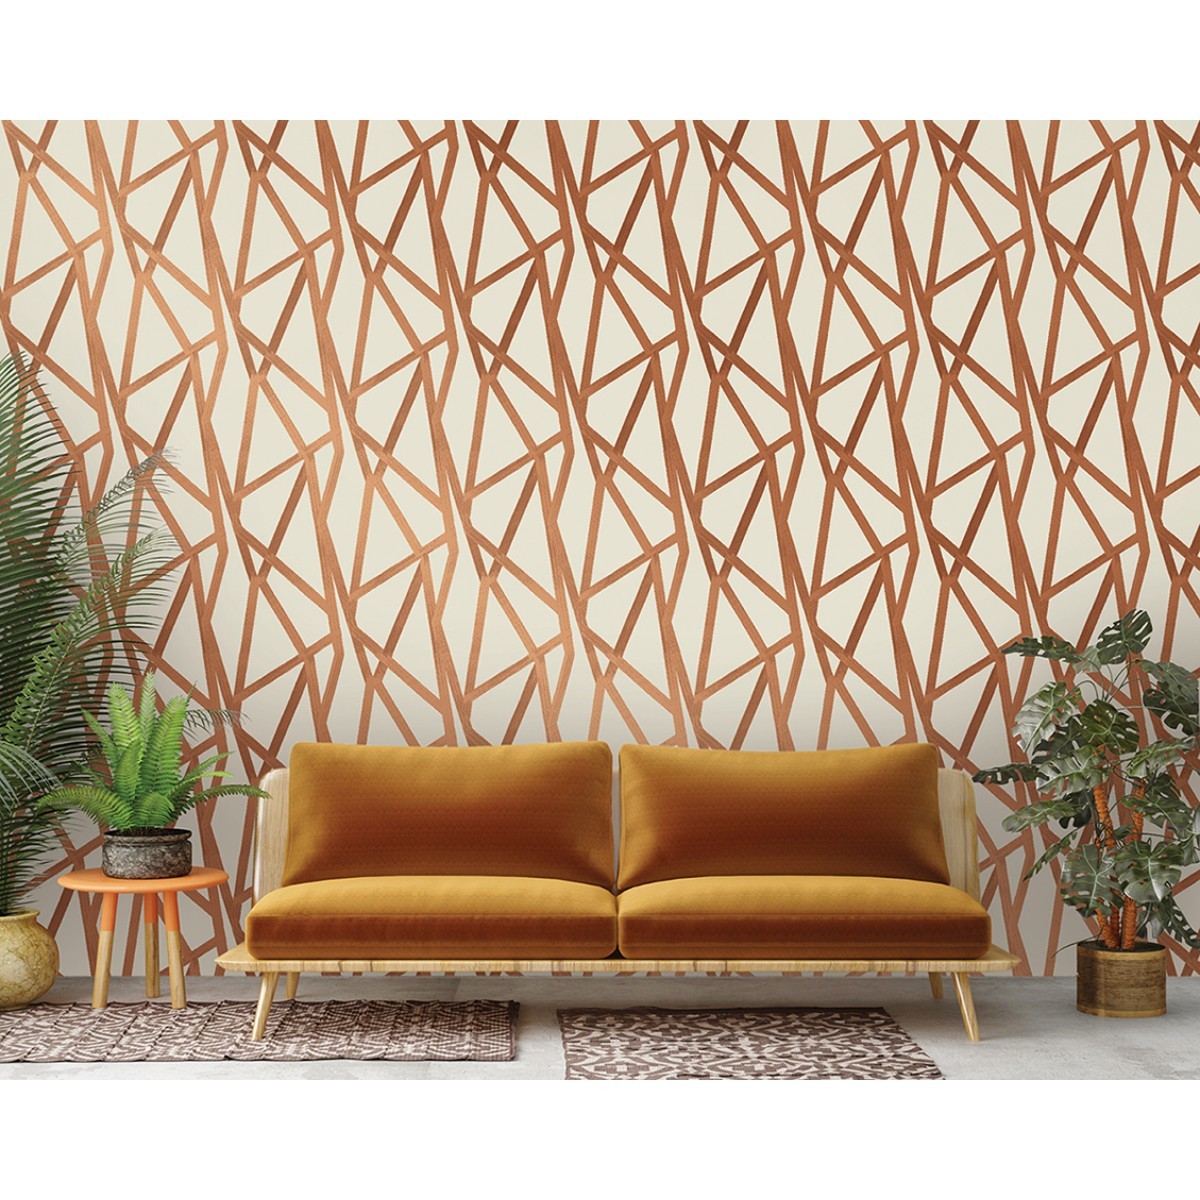 Intersections Urban Bronze Self-Adhesive IN412 Wallpaper